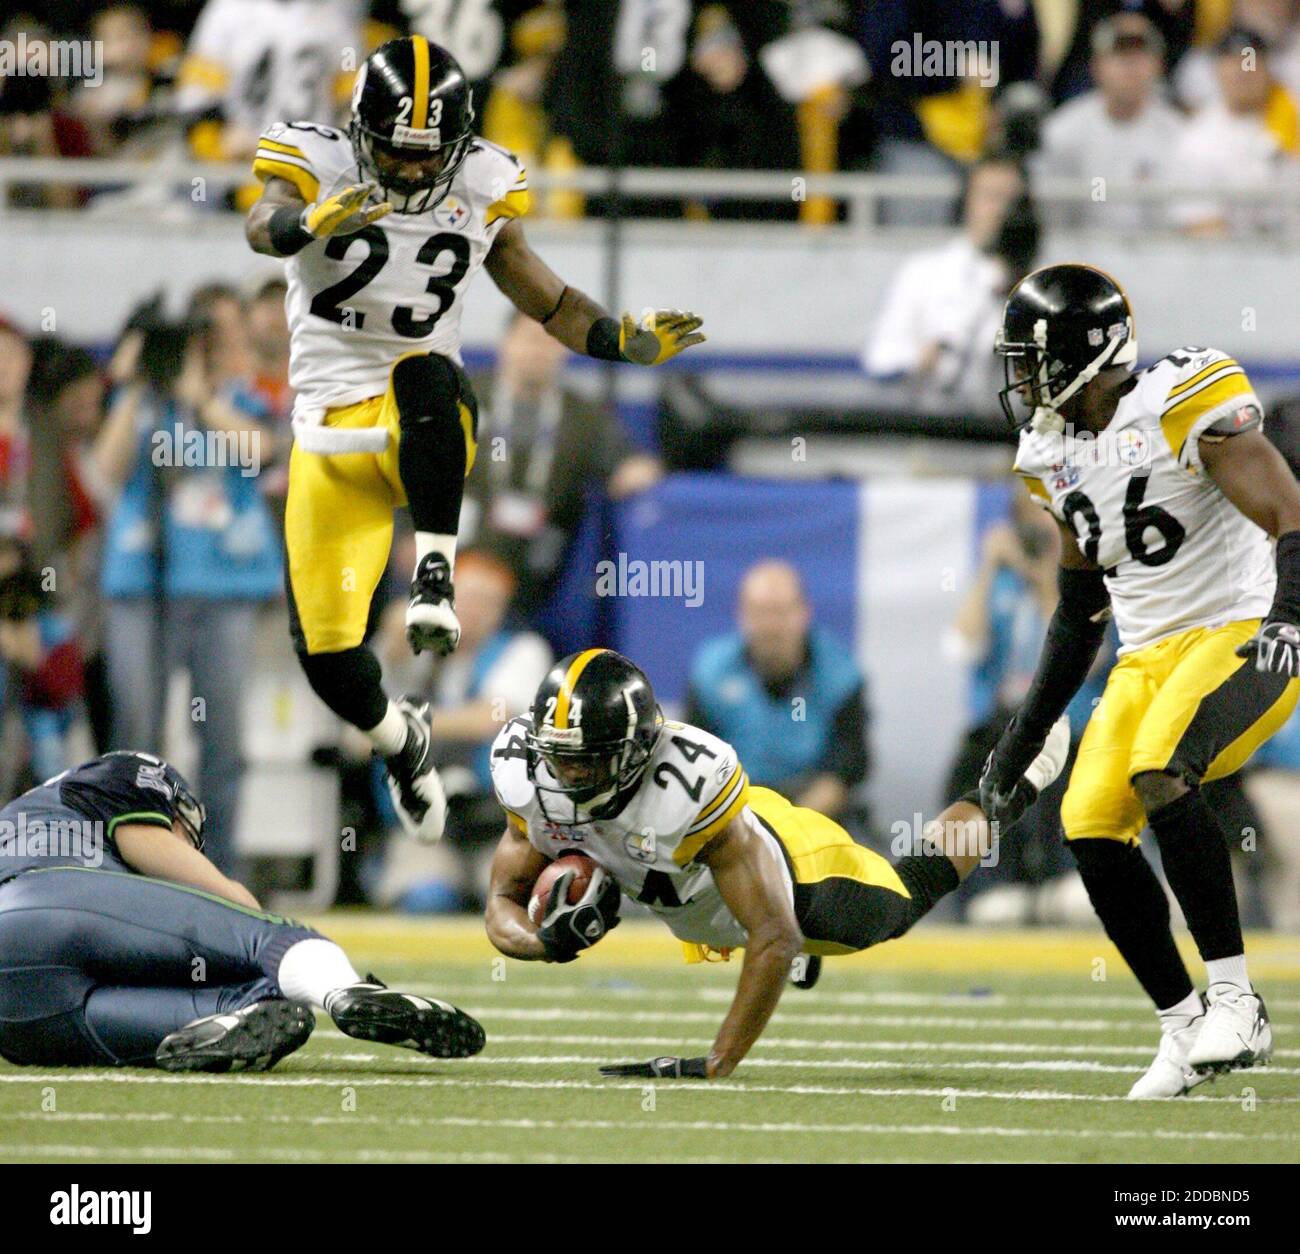 NO FILM, NO VIDEO, NO TV, NO DOCUMENTARY - Pittsburgh Steelers' Ike Taylor (24) returns an interception during the fourth quarter of Super Bowl XL at Ford Field in Detroit, Michigan, USA, on February 5, 2006. Photo by Mandi Wright/Detroit Free Press/KRT/Cameleon/ABACAPRESS.COM Stock Photo